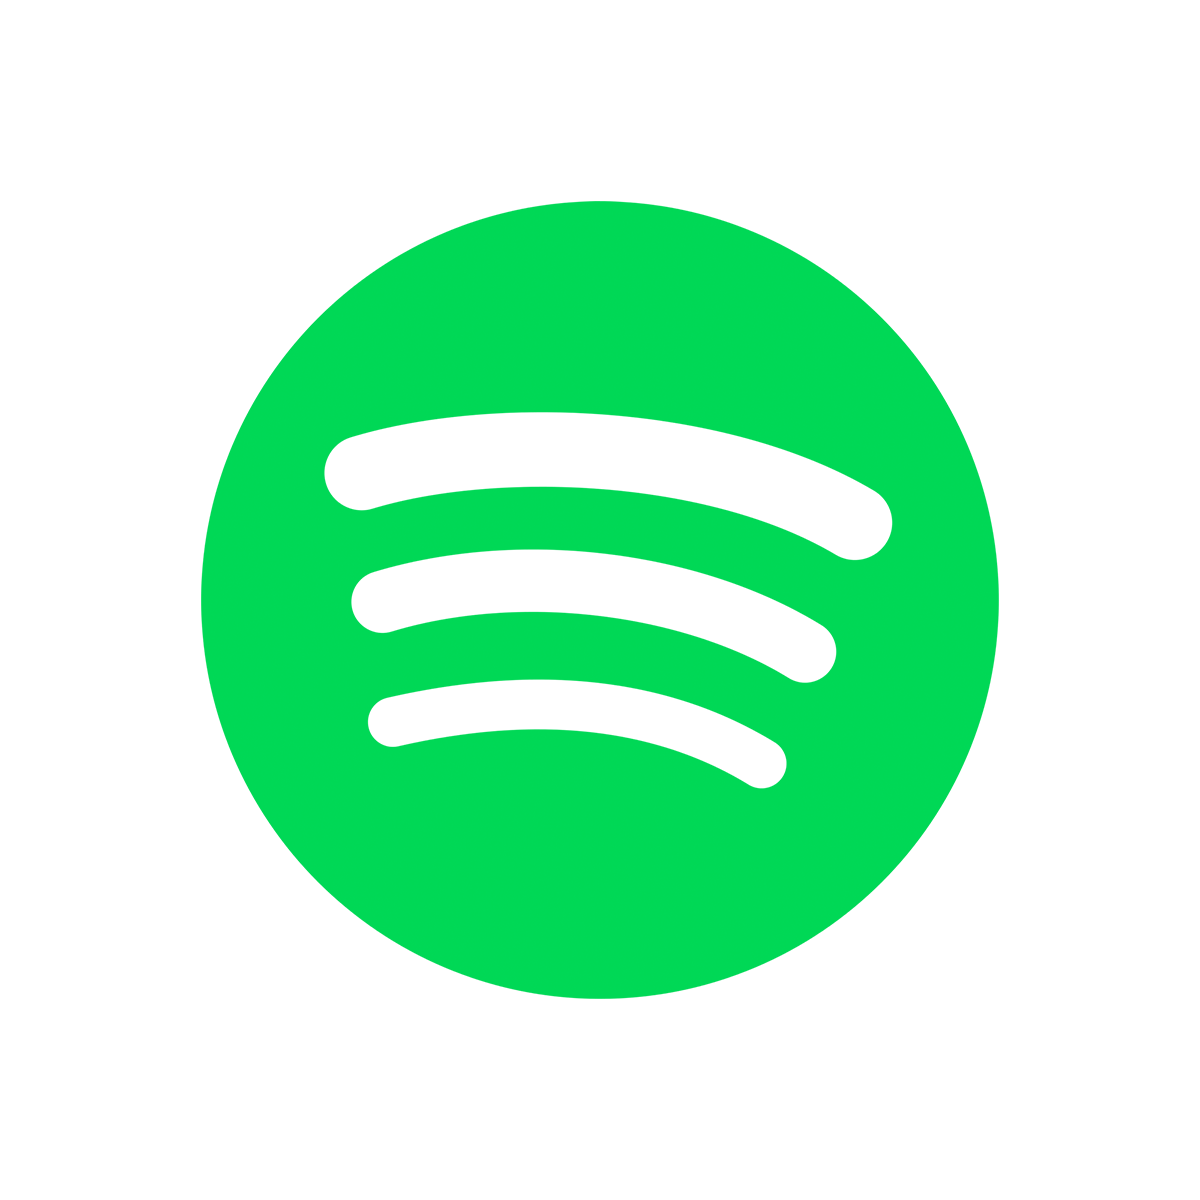 https://www.pngall.com/wp-content/uploads/9/Spotify-Logo.png